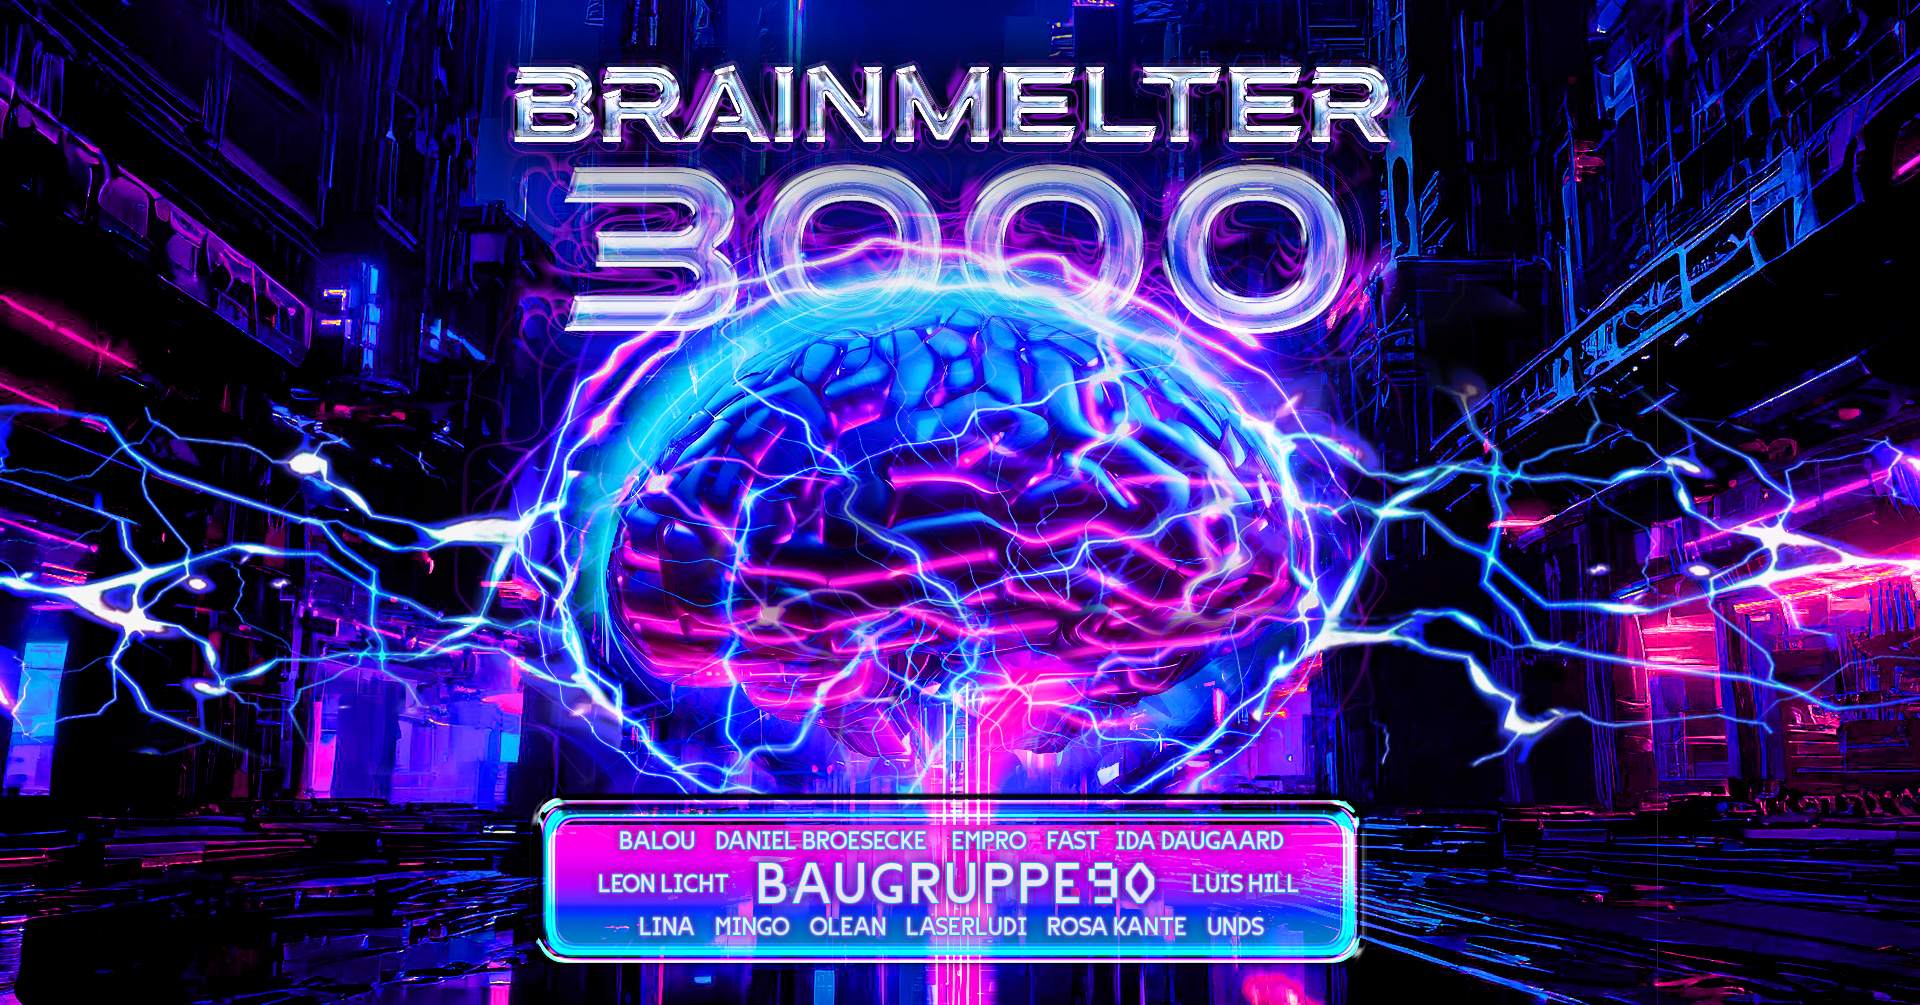 Renate X Brainmelter 3000 w/ BAUGRUPPE90 and many more - Página frontal